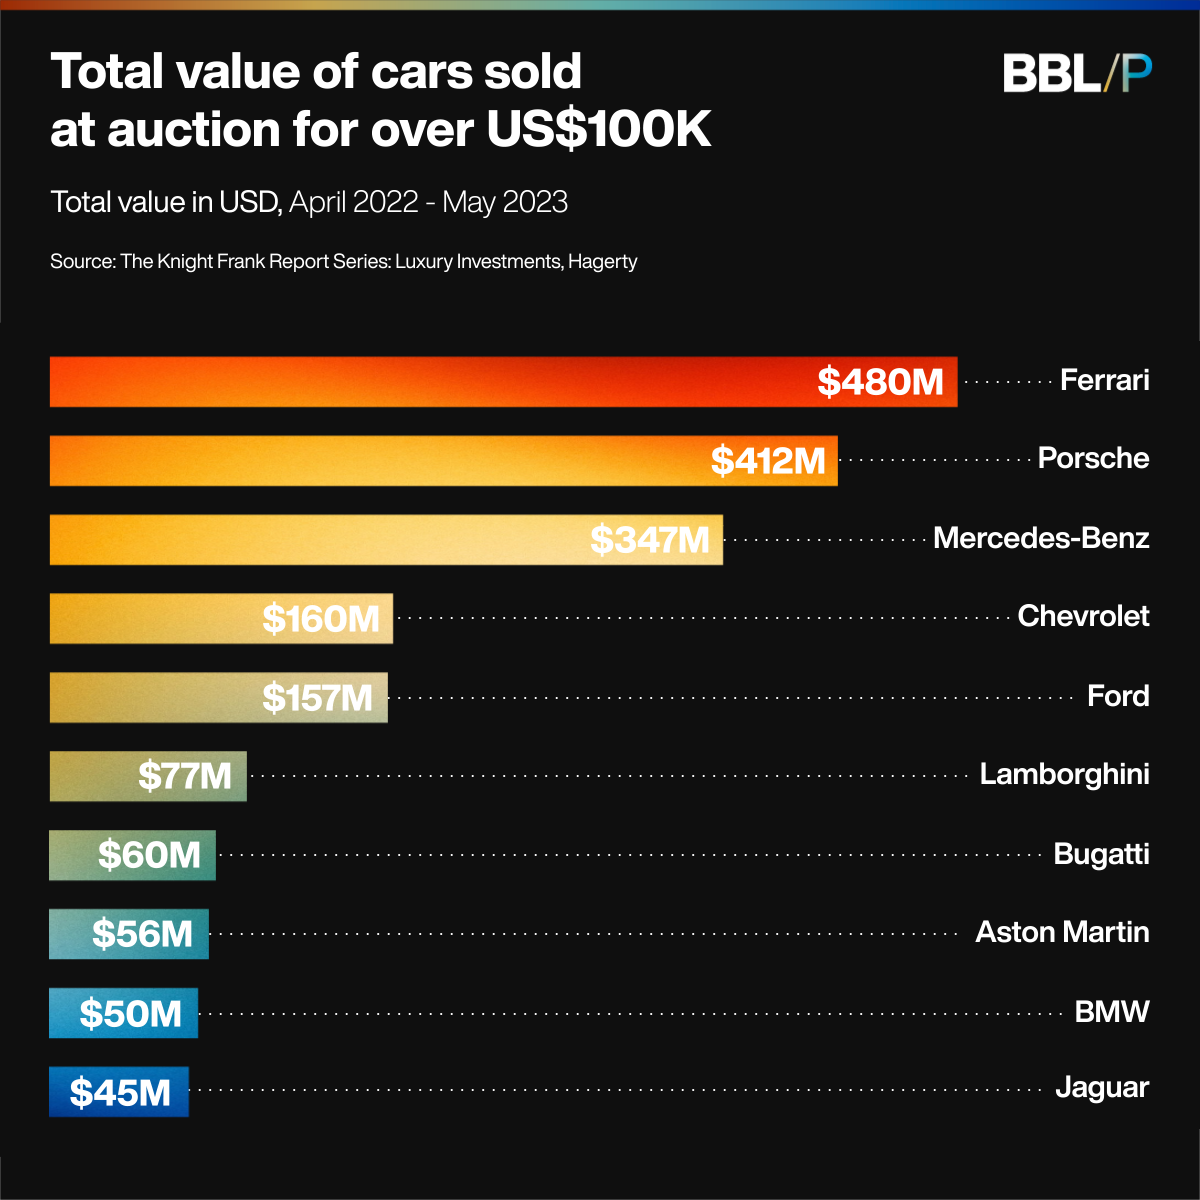 Value of US$100K Cars Sold at Auctions